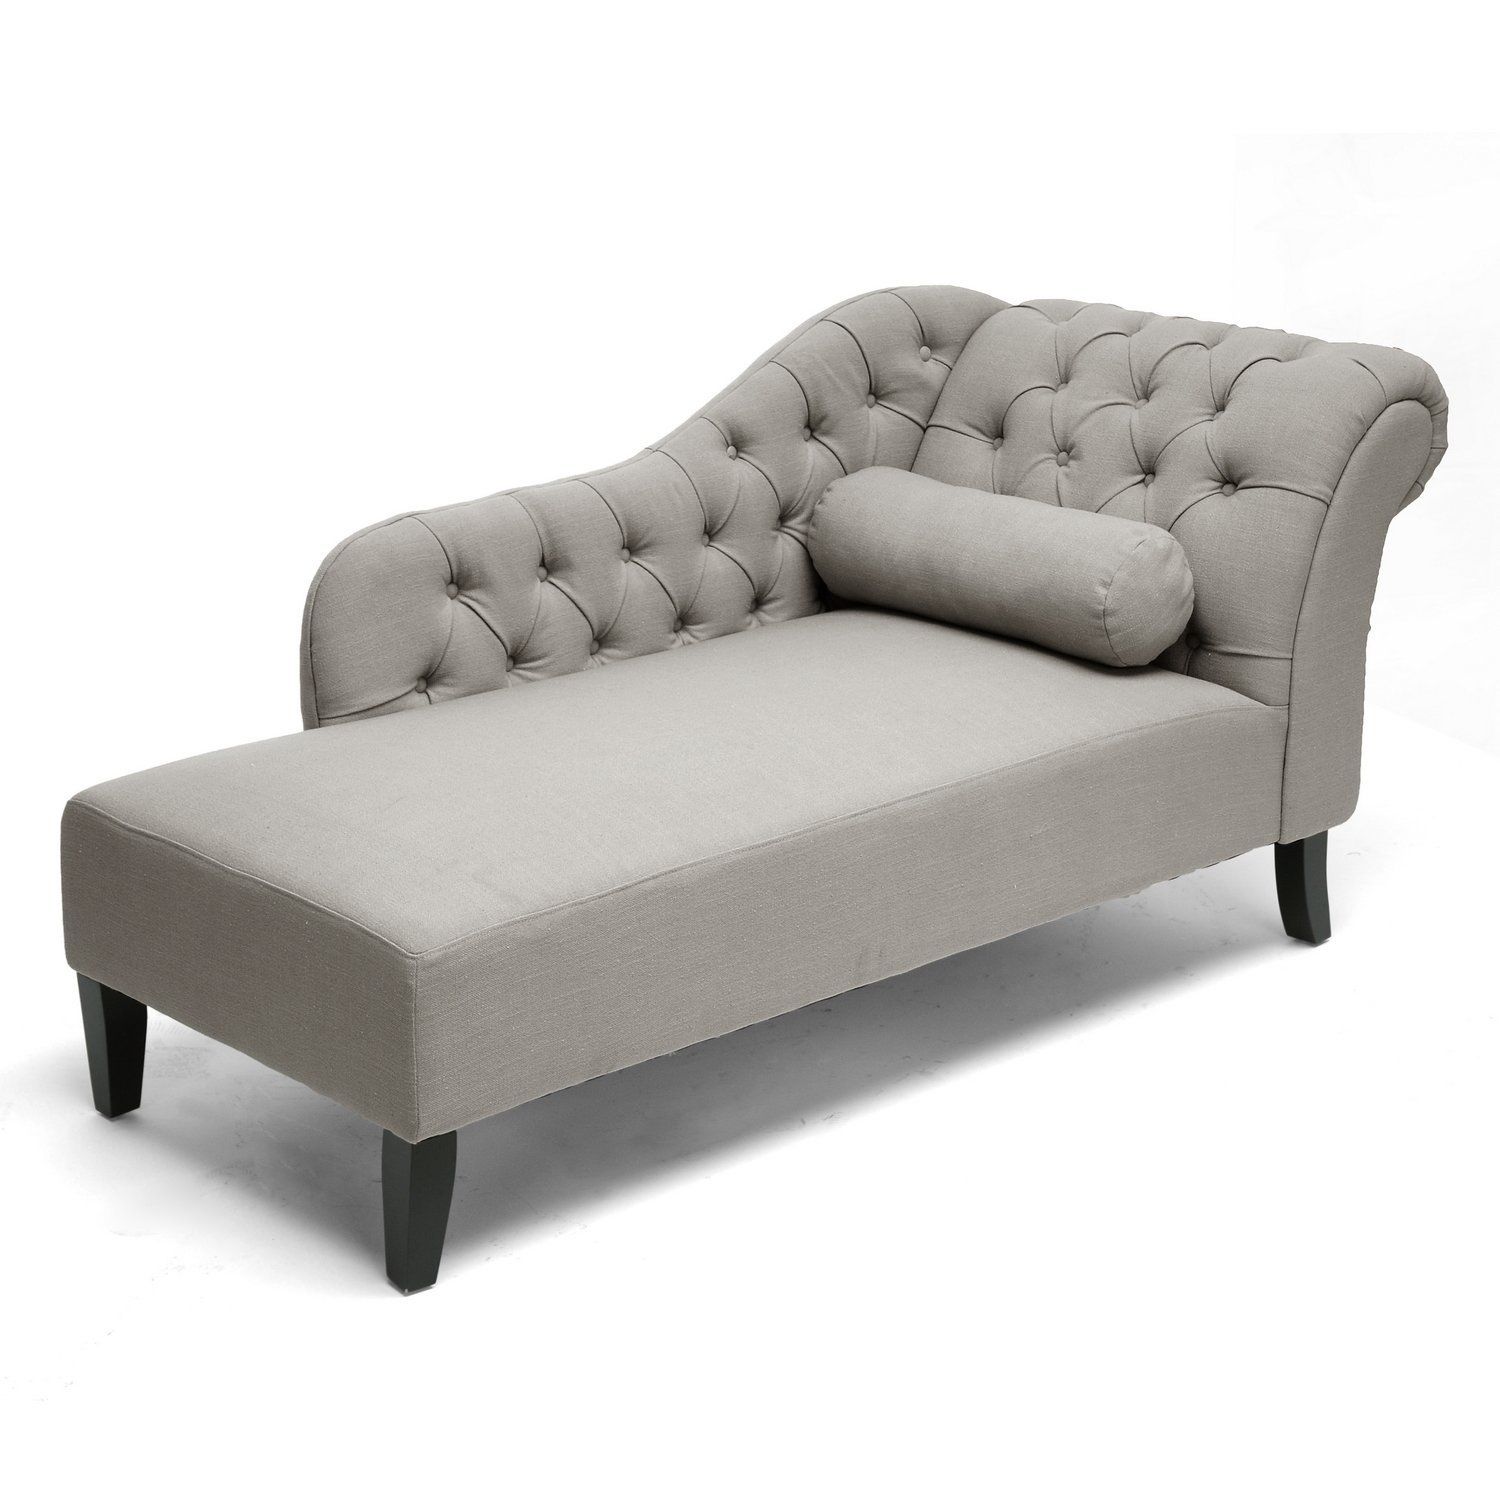 Trendy Grey Chaise Lounges Throughout Furniture: Grey Leather Chaise Lounge Chair (View 13 of 15)